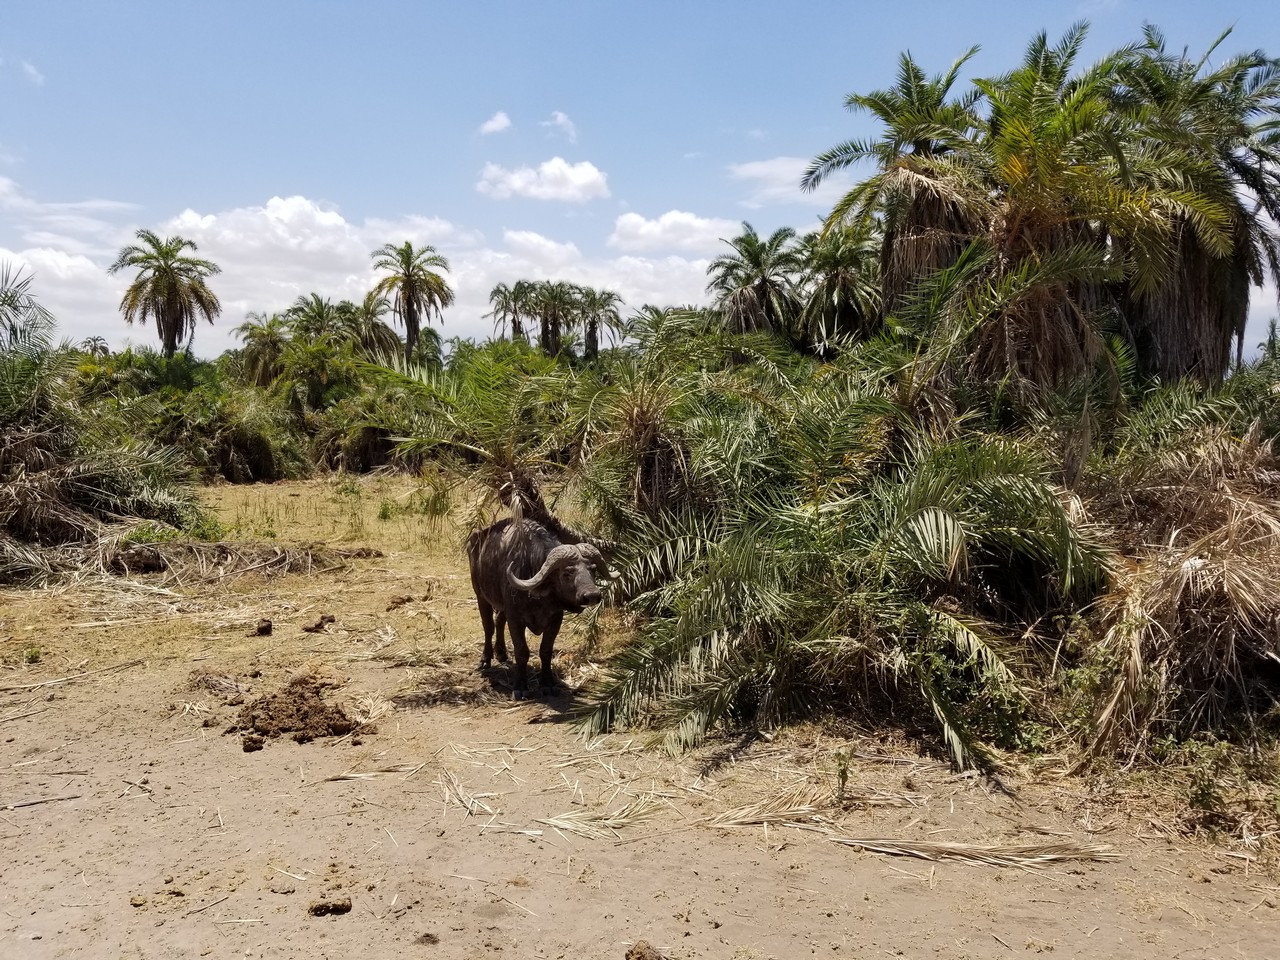 a buffalo standing in a dirt field with palm trees